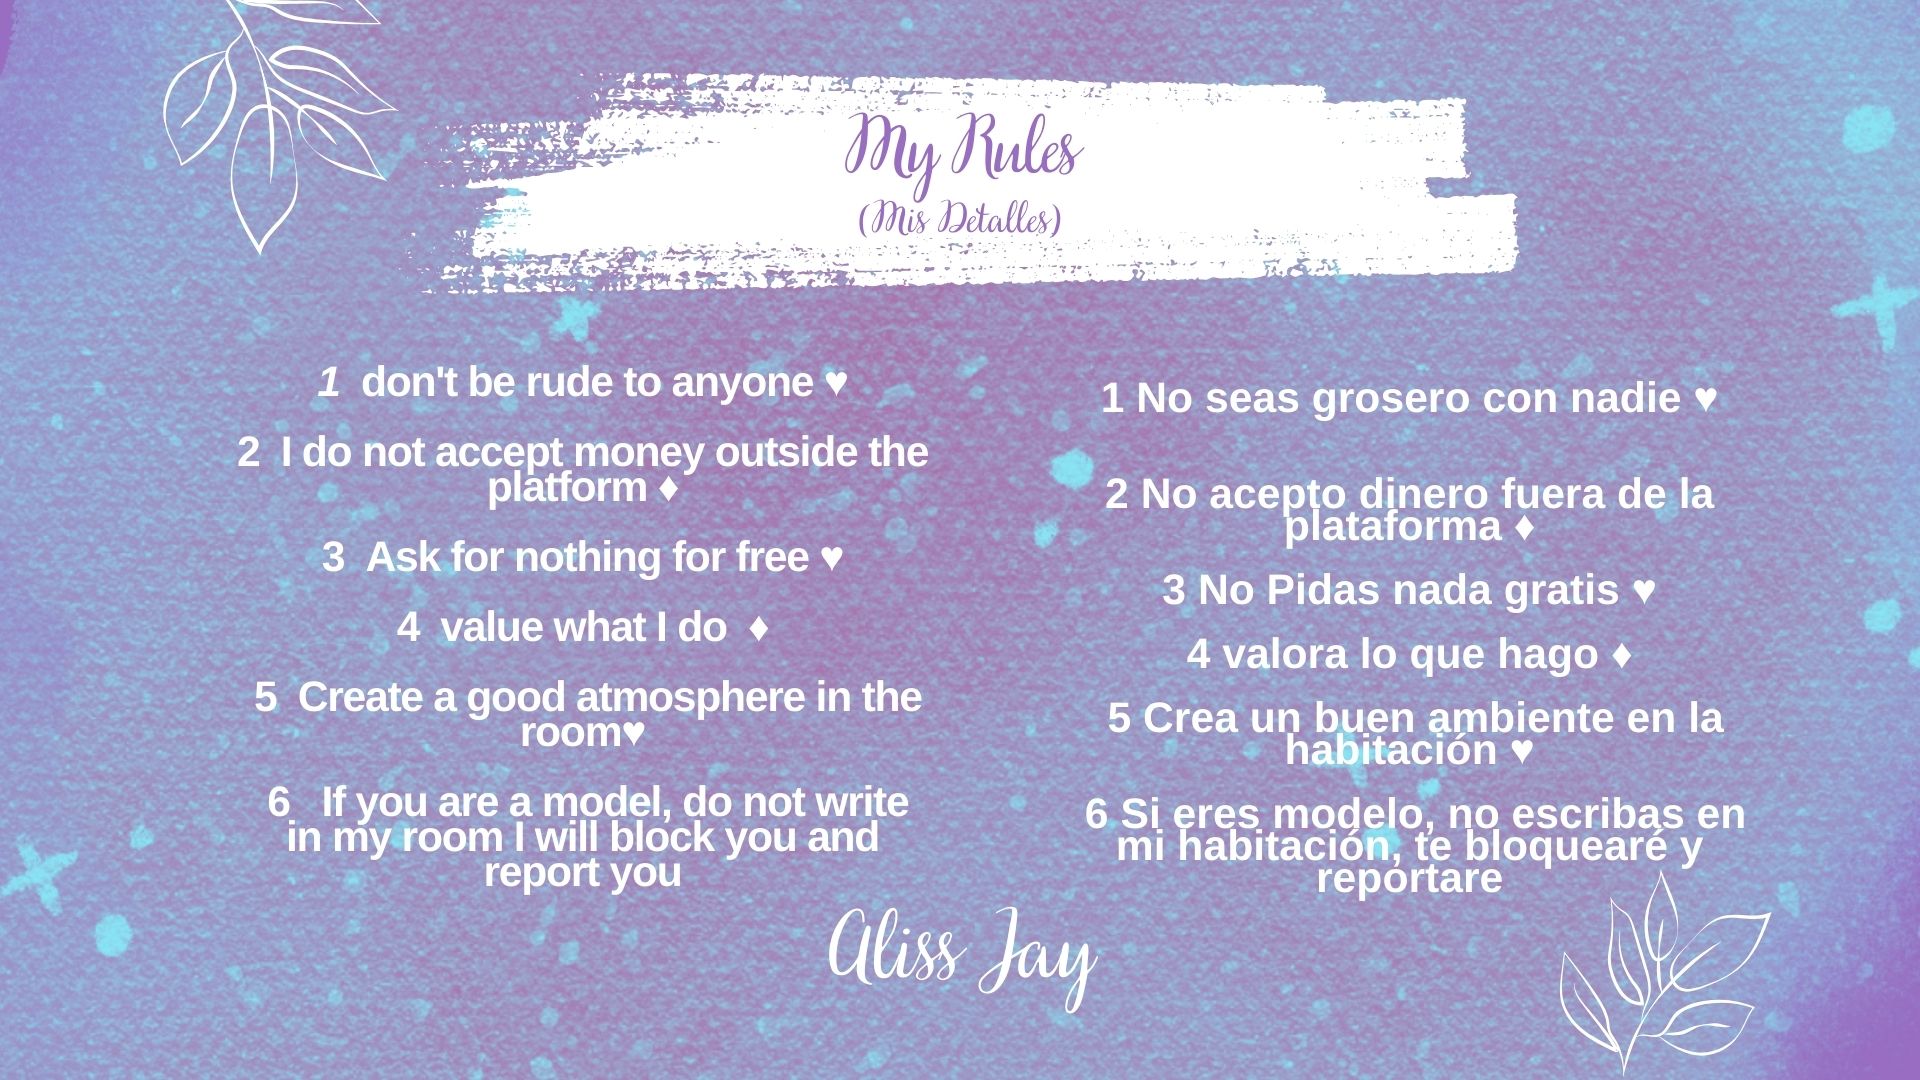 Aliss-Jay My Rules image: 1